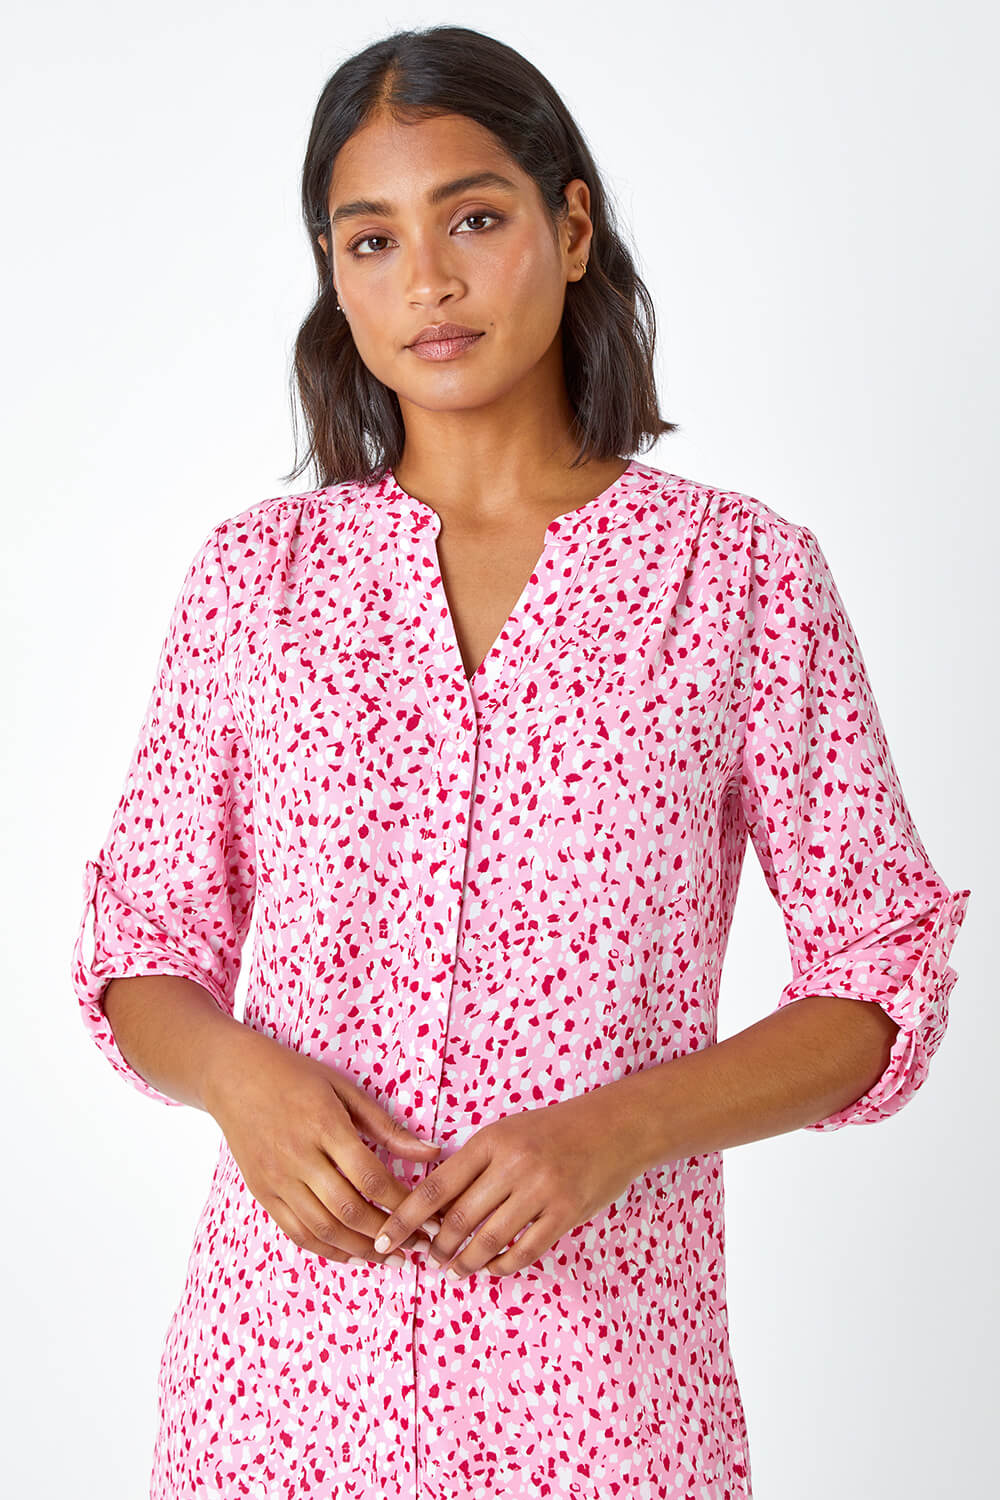 PINK Ditsy Print Button Up Blouse, Image 4 of 5